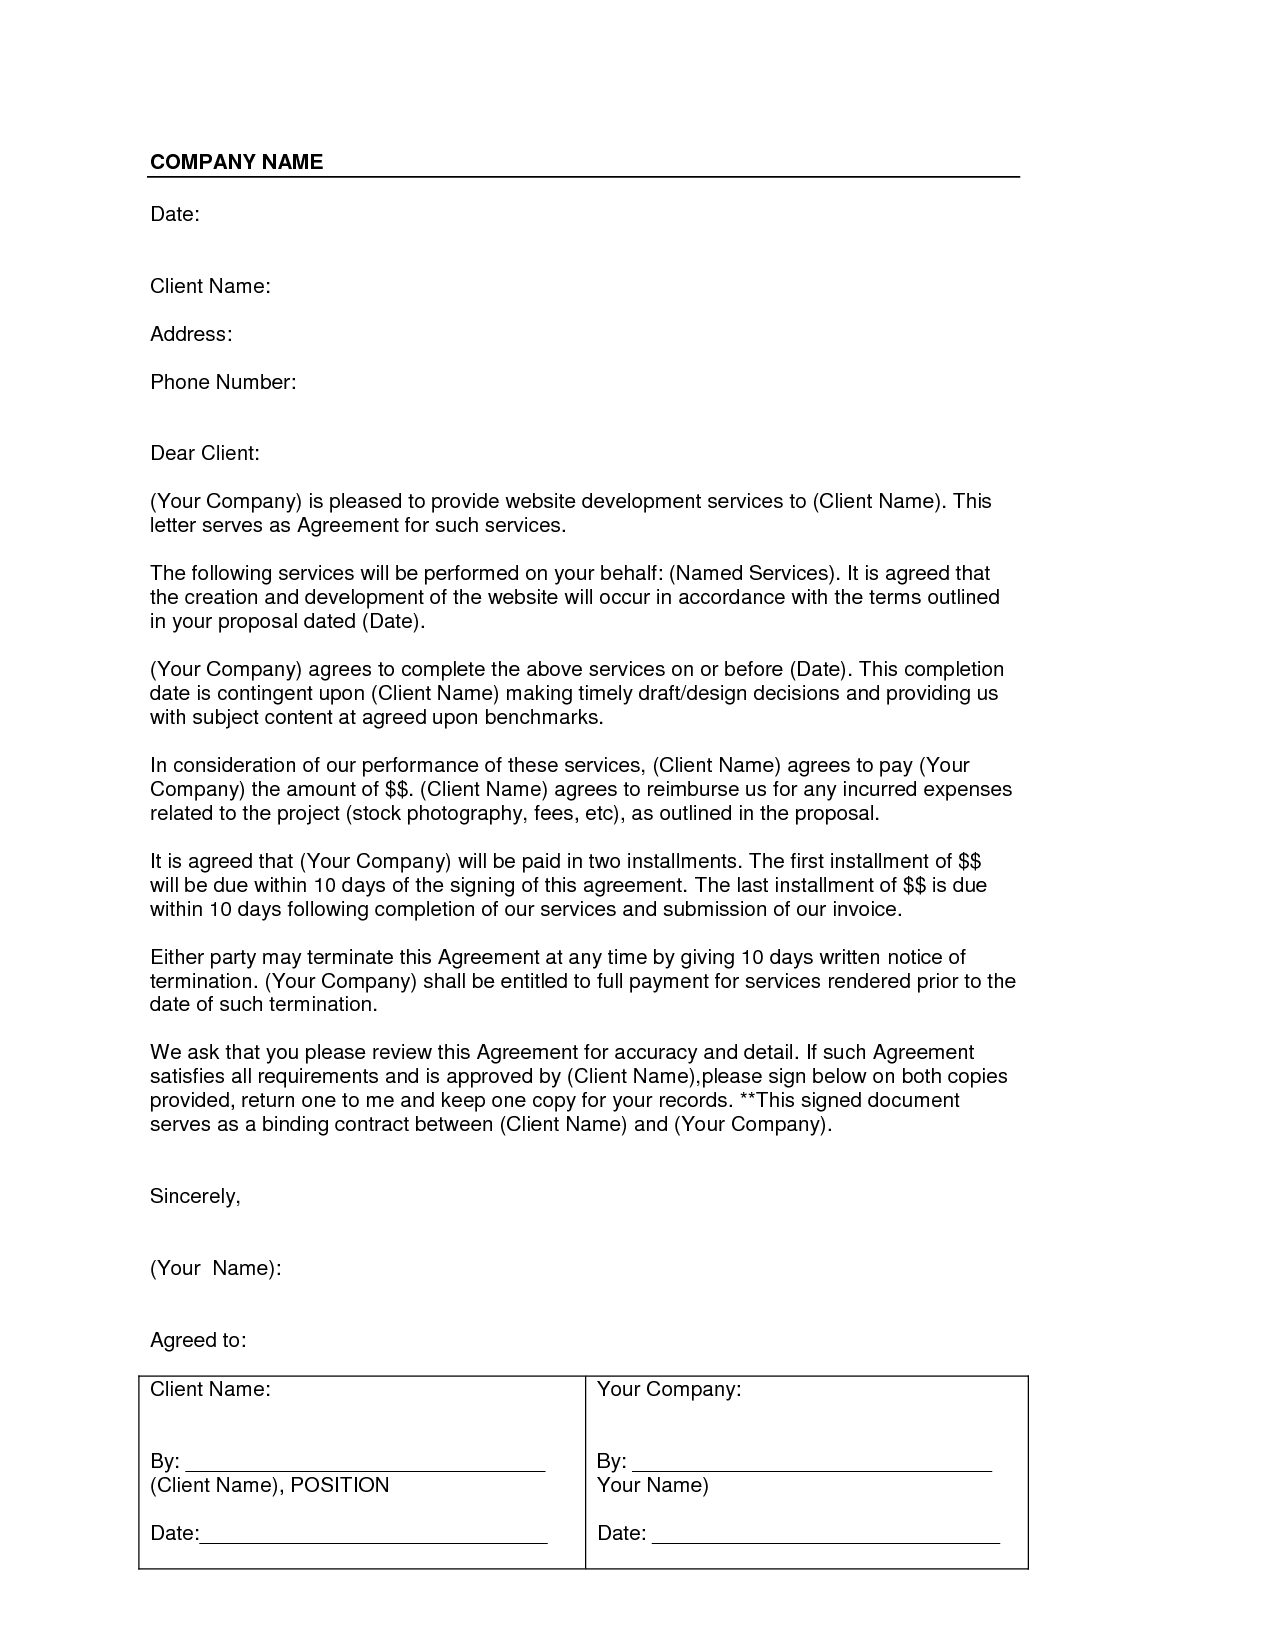 Letter Of Agreement - Free Printable Documents